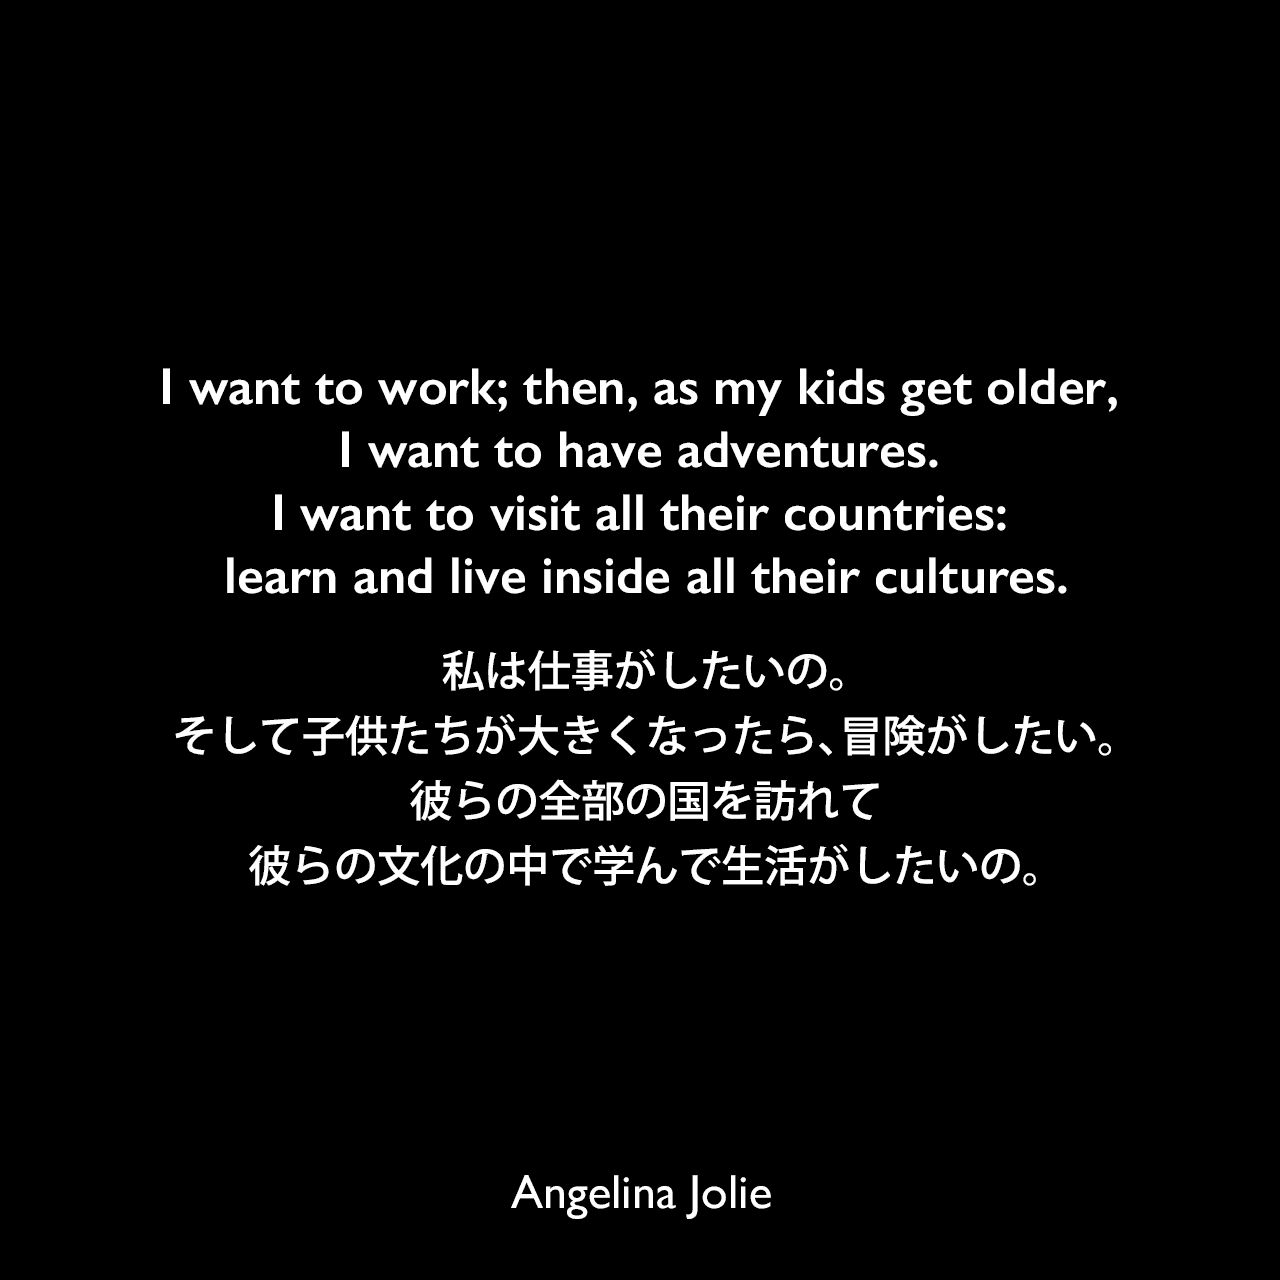 I want to work; then, as my kids get older, I want to have adventures. I want to visit all their countries: learn and live inside all their cultures.私は仕事がしたいの。そして子供たちが大きくなったら、冒険がしたい。彼らの全部の国を訪れて、彼らの文化の中で学んで生活がしたいの。Angelina Jolie